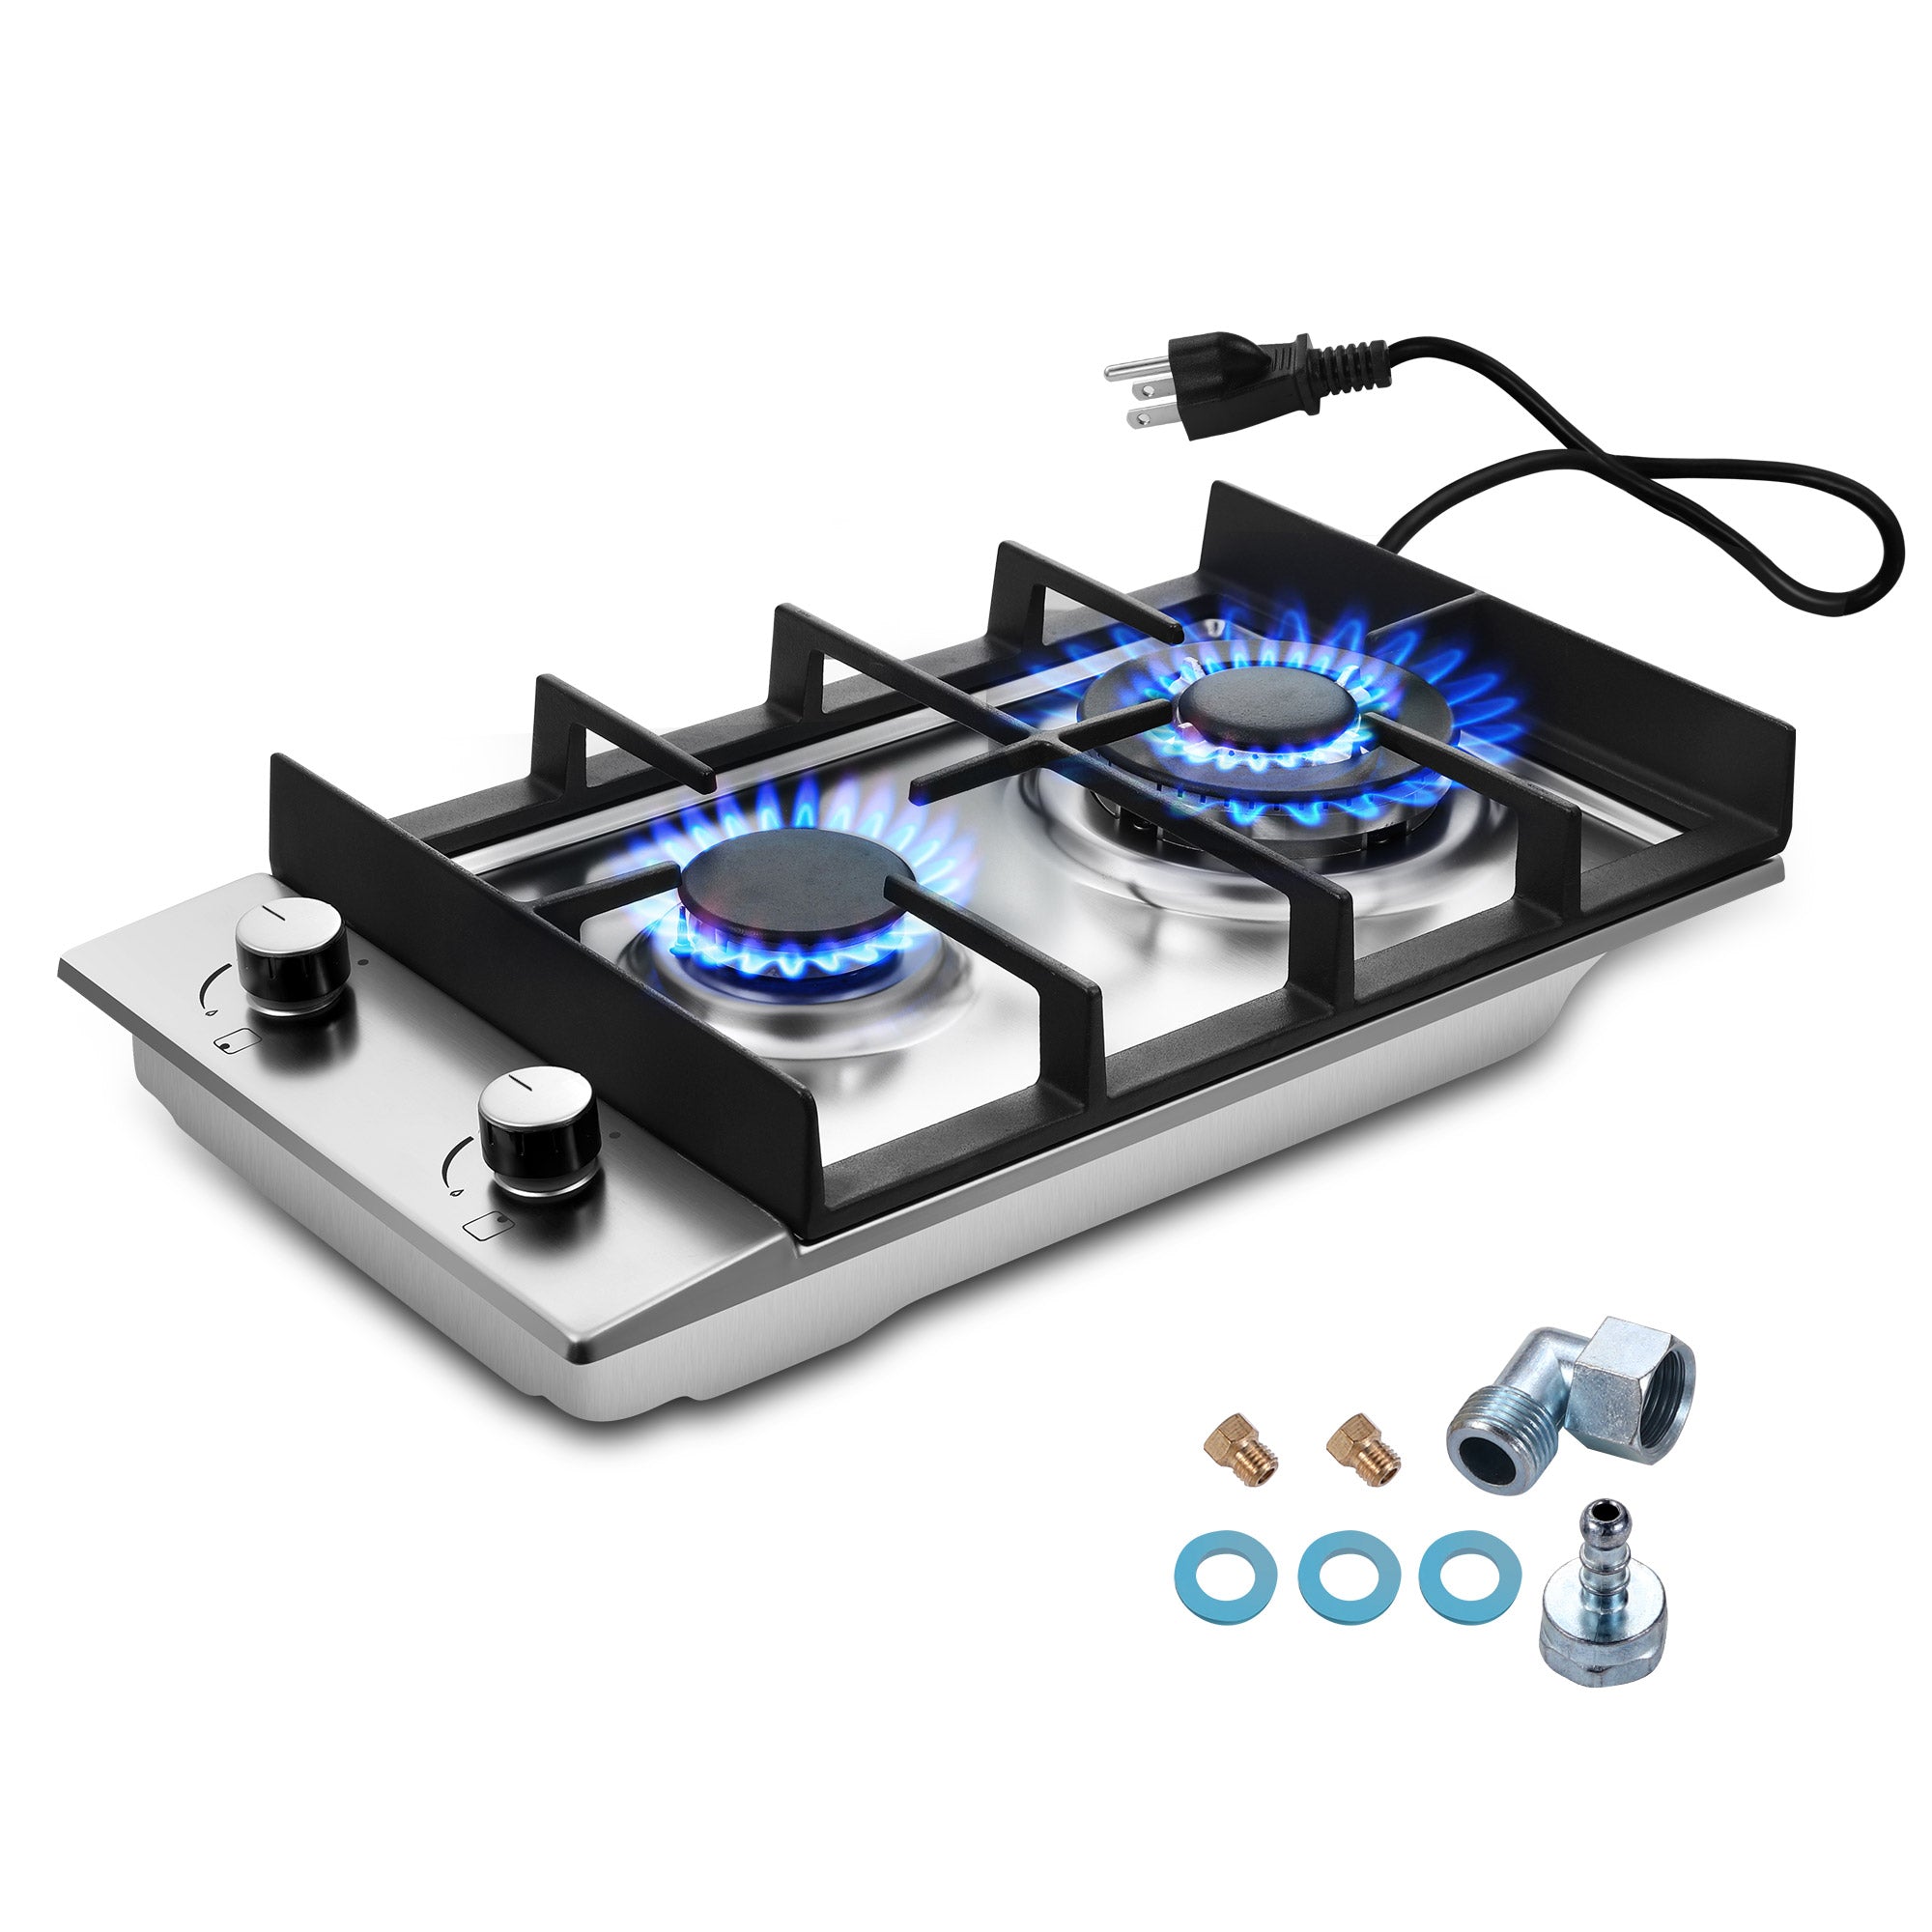 GC001-122S - 12 inch - 2 Burner Bulit-in Stainless Steel Gas Cooktop with Thermocouple Protection